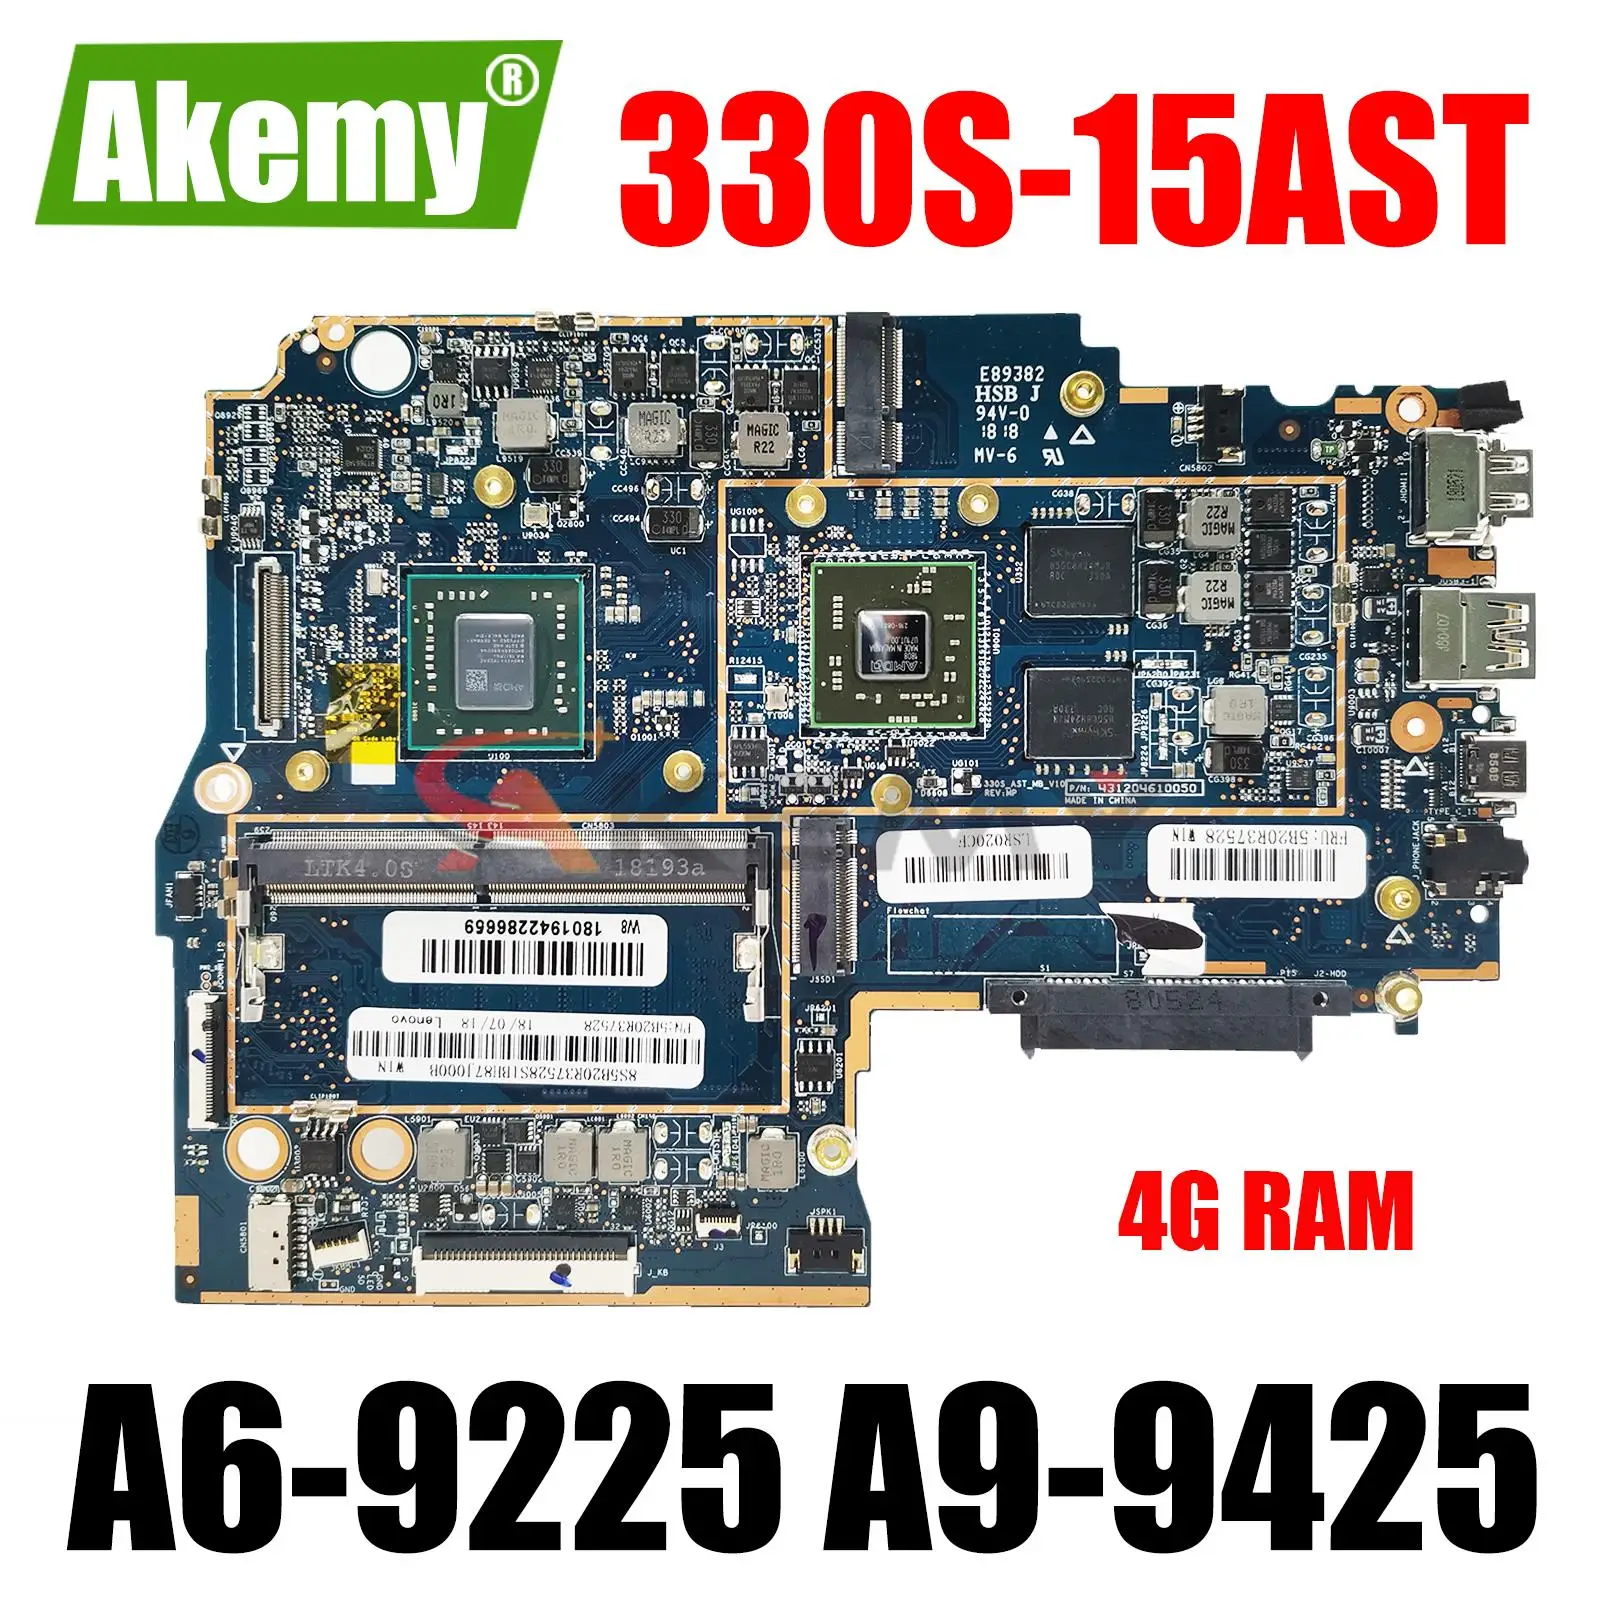 

For Lenovo 330S-15AST Laptop Motherboard with CPU A6-9225 A9-9425 CPU GPU R530 2G 4GB RAM 100% Test Work